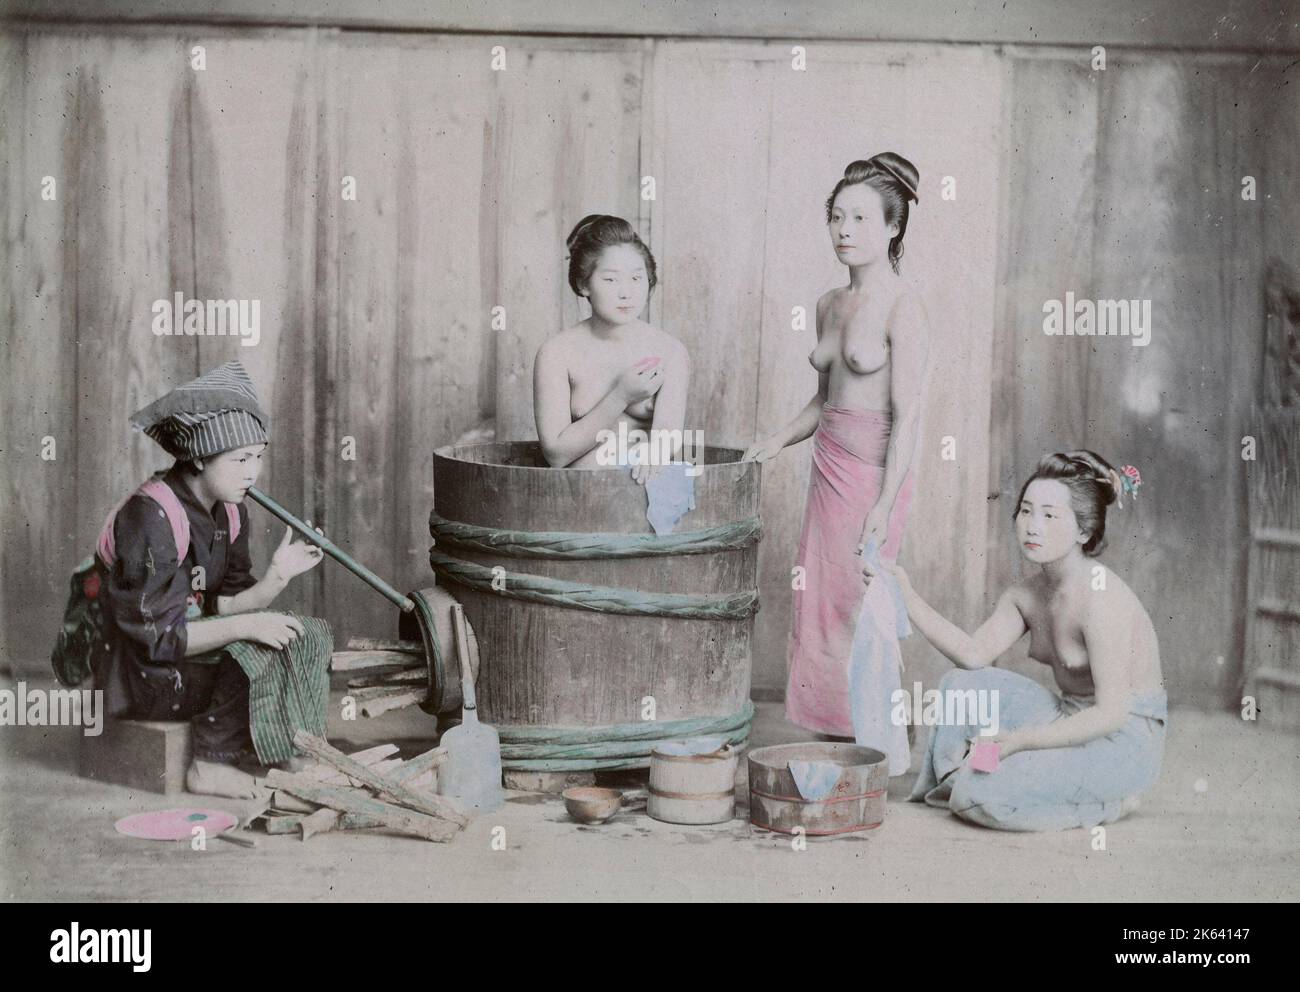 Young women taking a bath at home, late 19th century Japan. Vintage 19th century photograph. Stock Photo